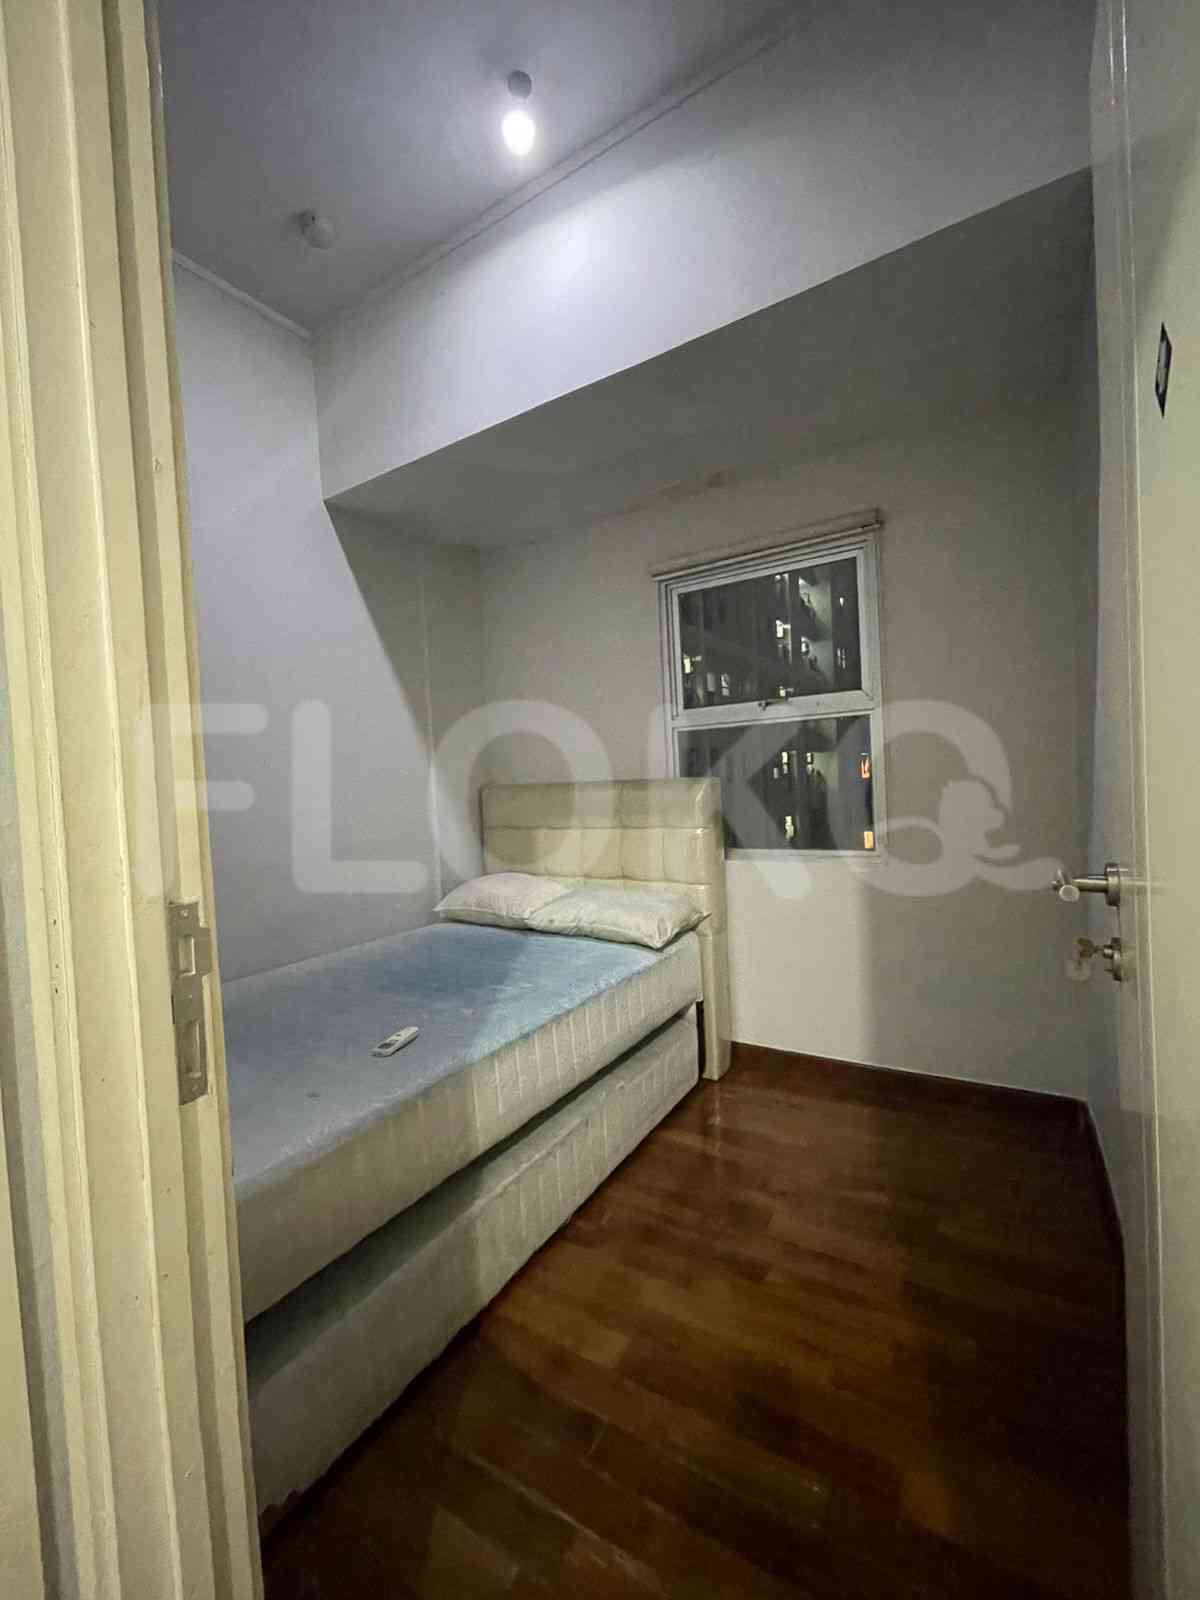 2 Bedroom on 18th Floor for Rent in Seasons City Apartment - fgr682 3